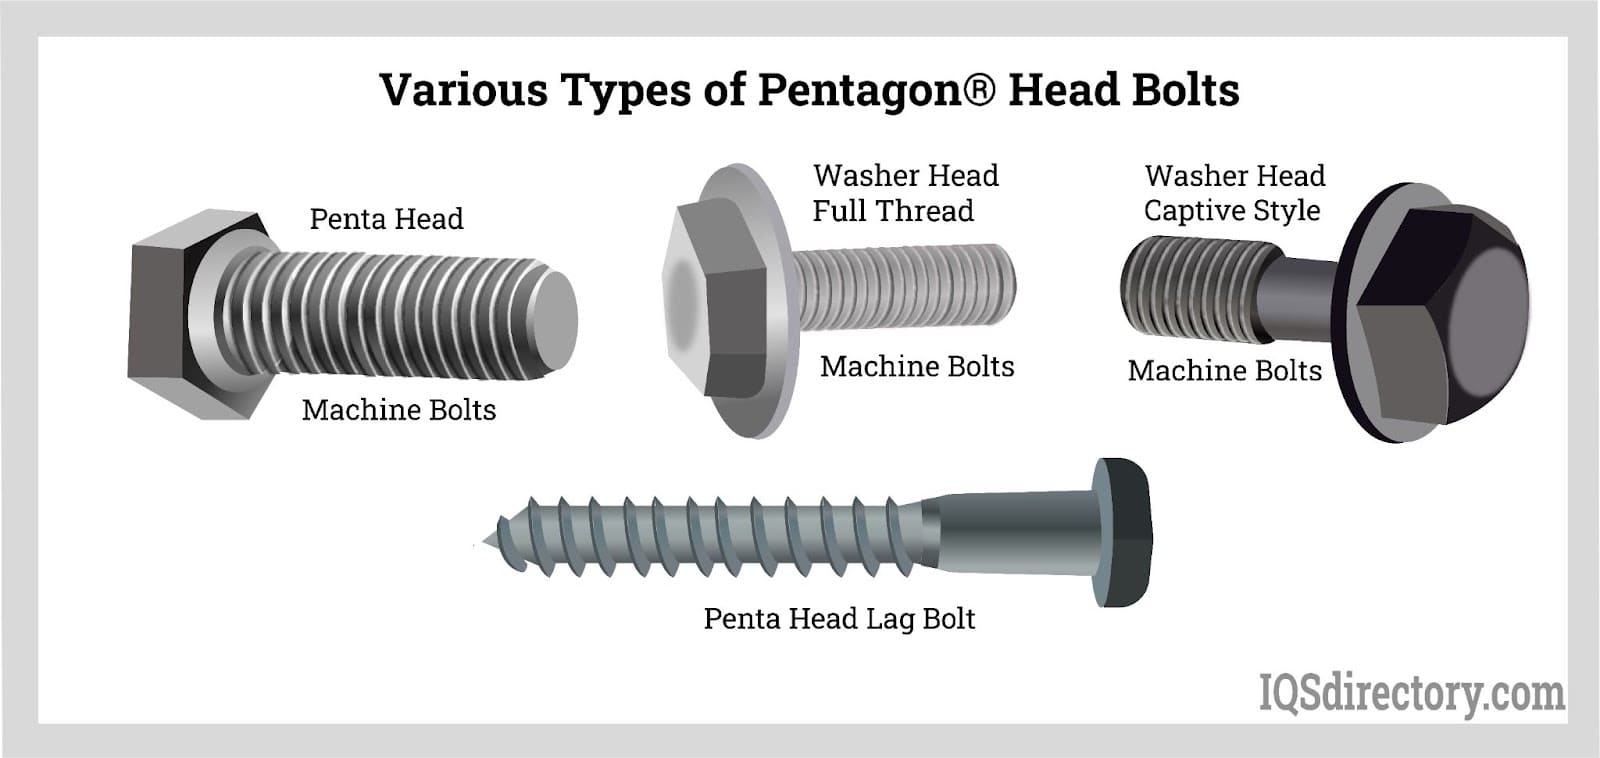 Various Types of Pentagon® Head Bolts